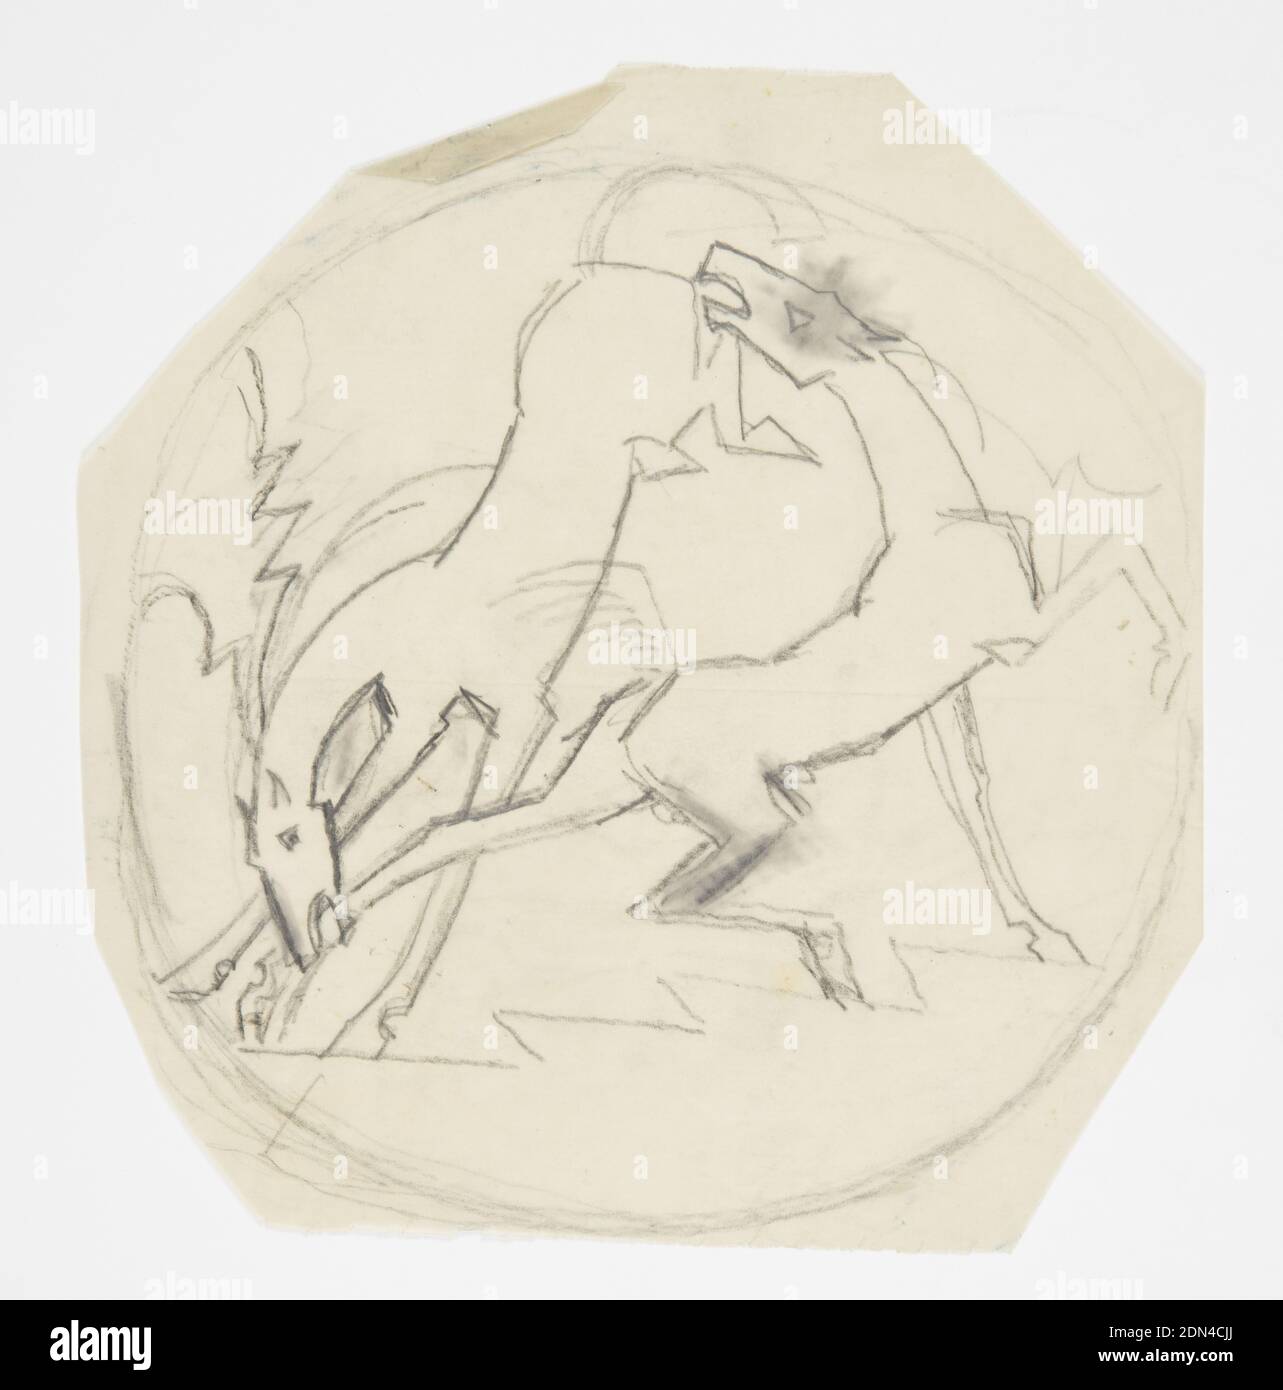 Design for Trivet, Fighting Horses, William Hunt Diederich, American, b. Hungary, 1884–1953, Graphite on paper, Design for a trivet. Within circular frame, two bucking horses biting each other at the ankle and rear., USA, 1917, figures, Drawing Stock Photo